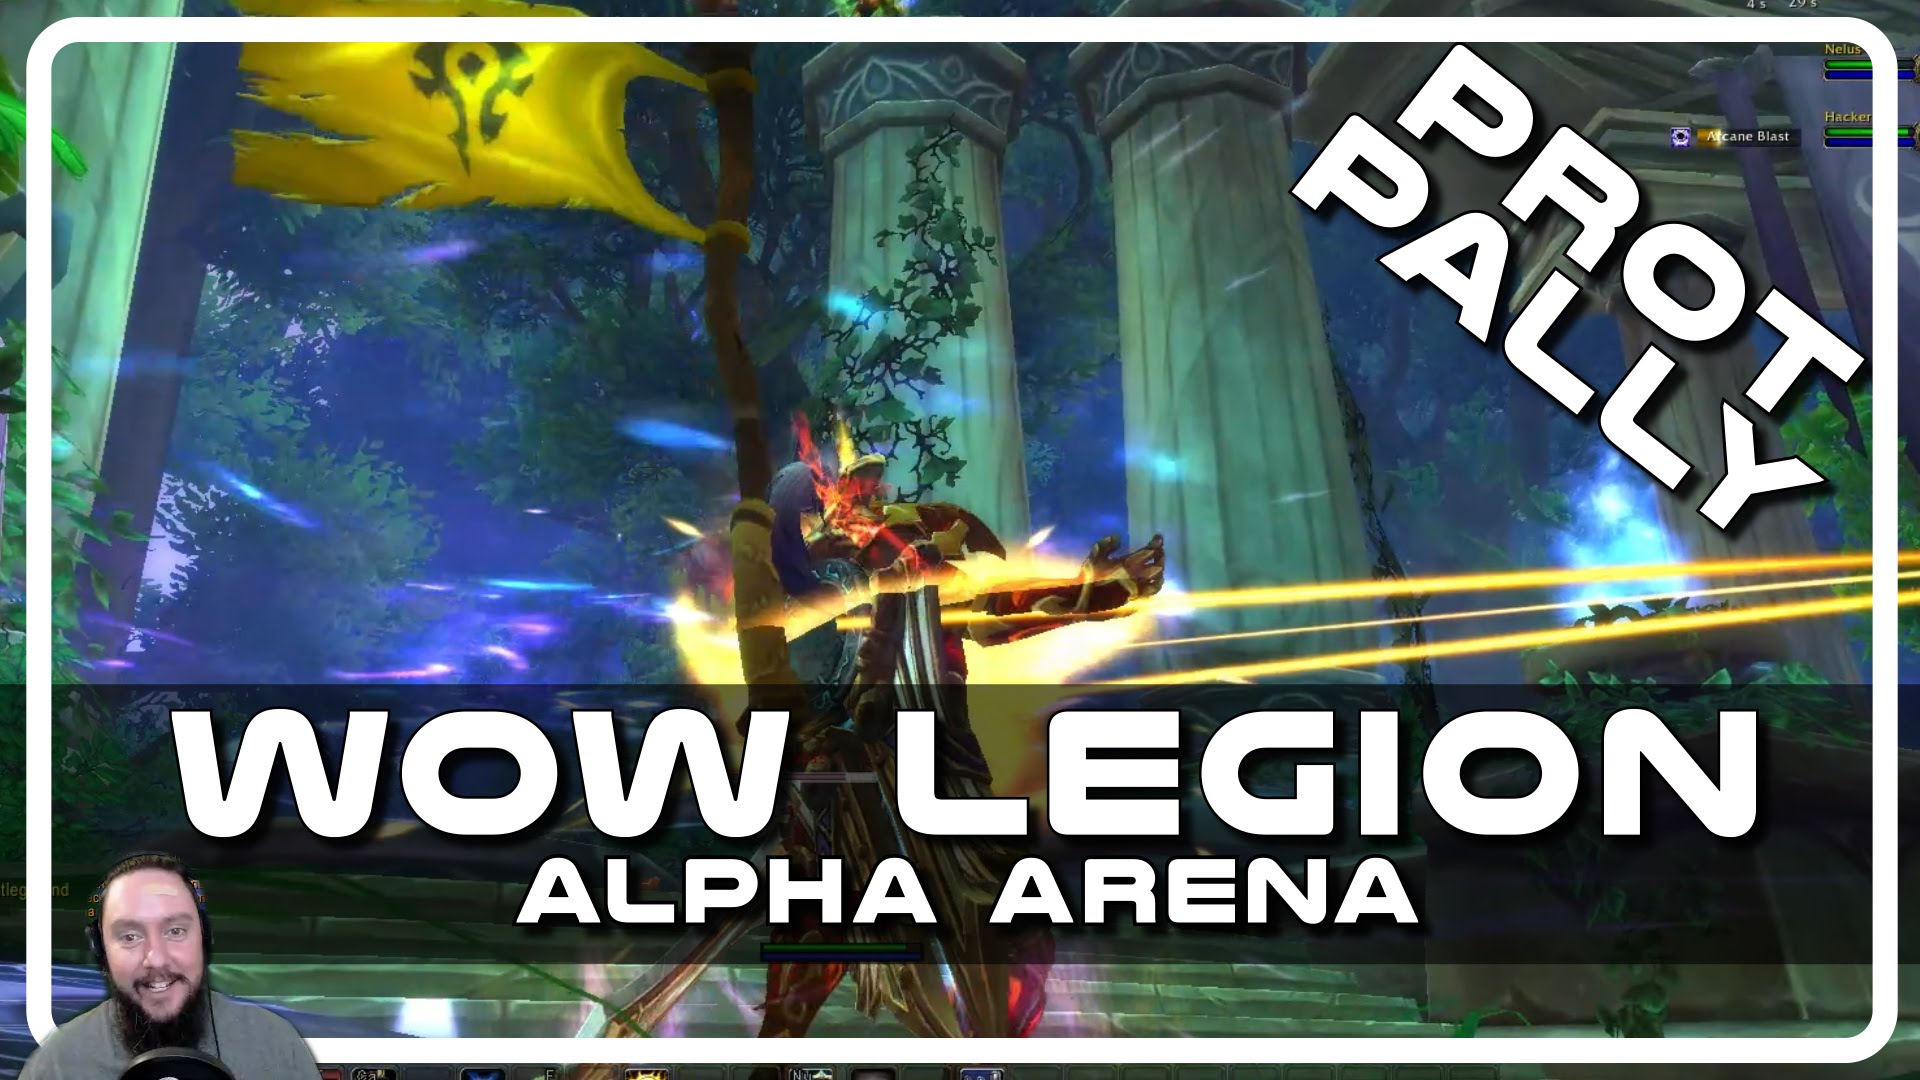 WoW Legion Alpha PvP – Prot Paladin Arena with Psynaps & MufasaPrime Deathknight (PvP Gameplay)